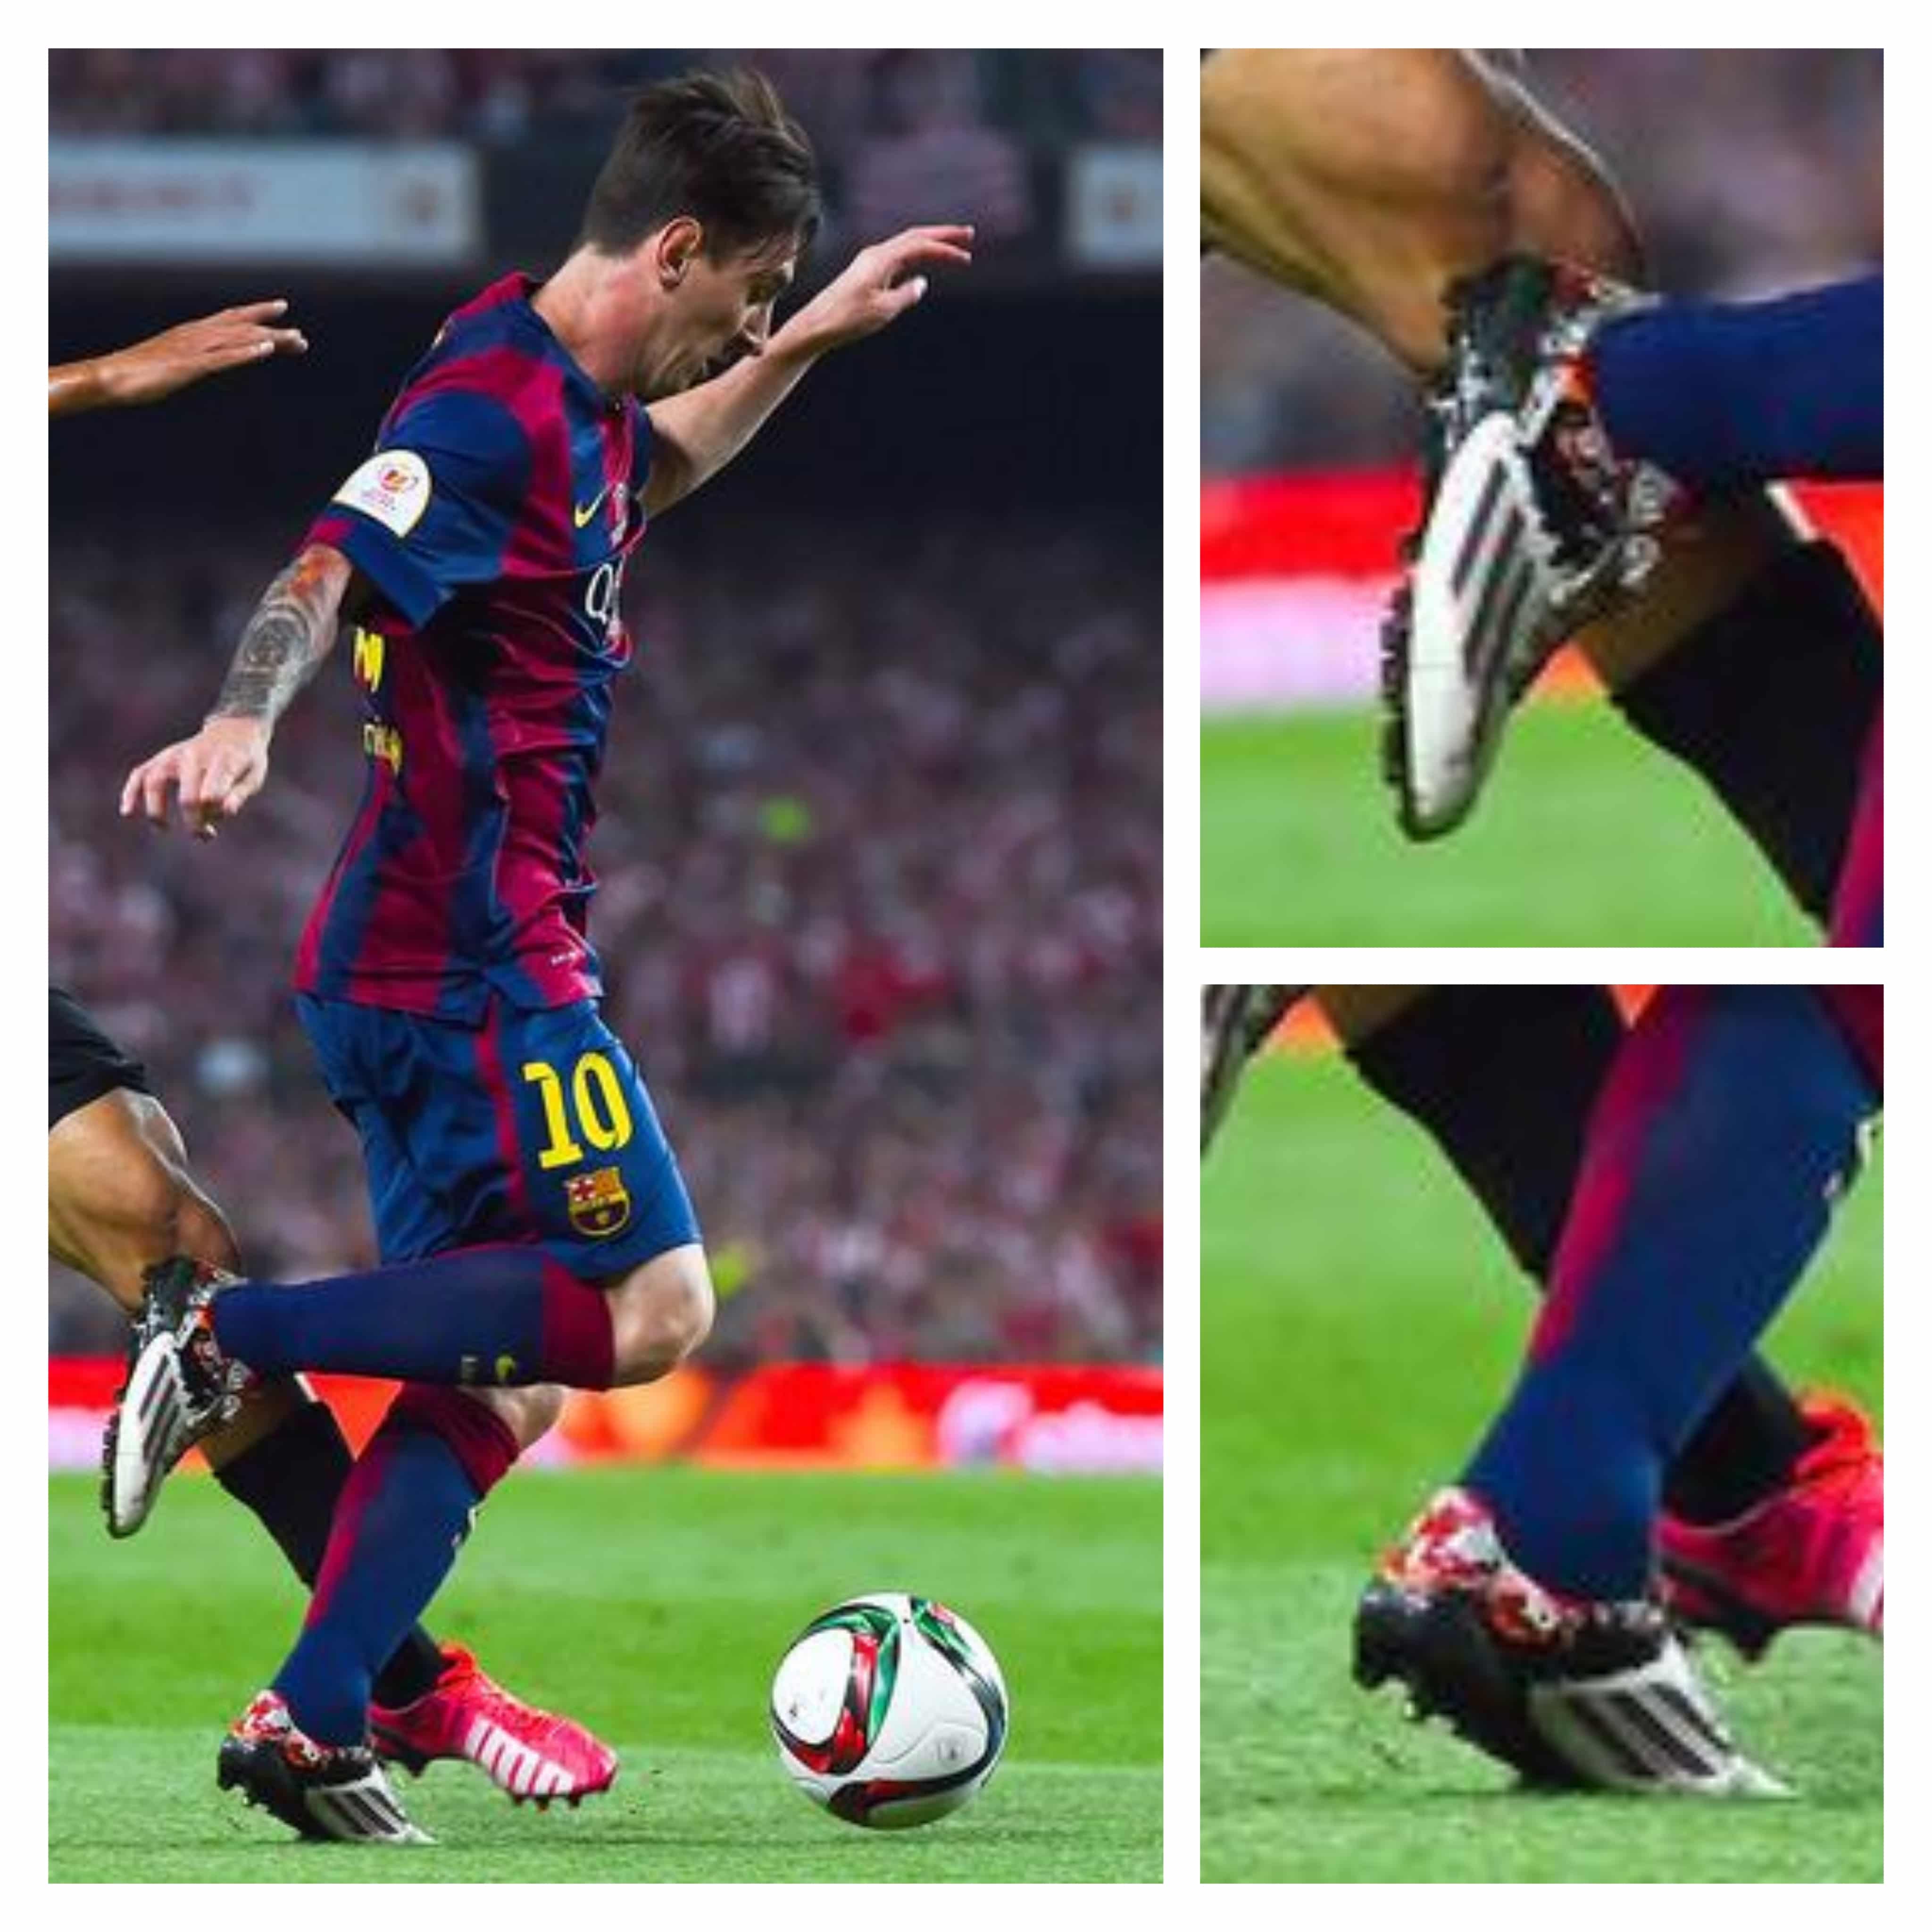 What Football Boots are Lionel Messi Wearing? - Boot History - F50 Messi Pibe de Barr10